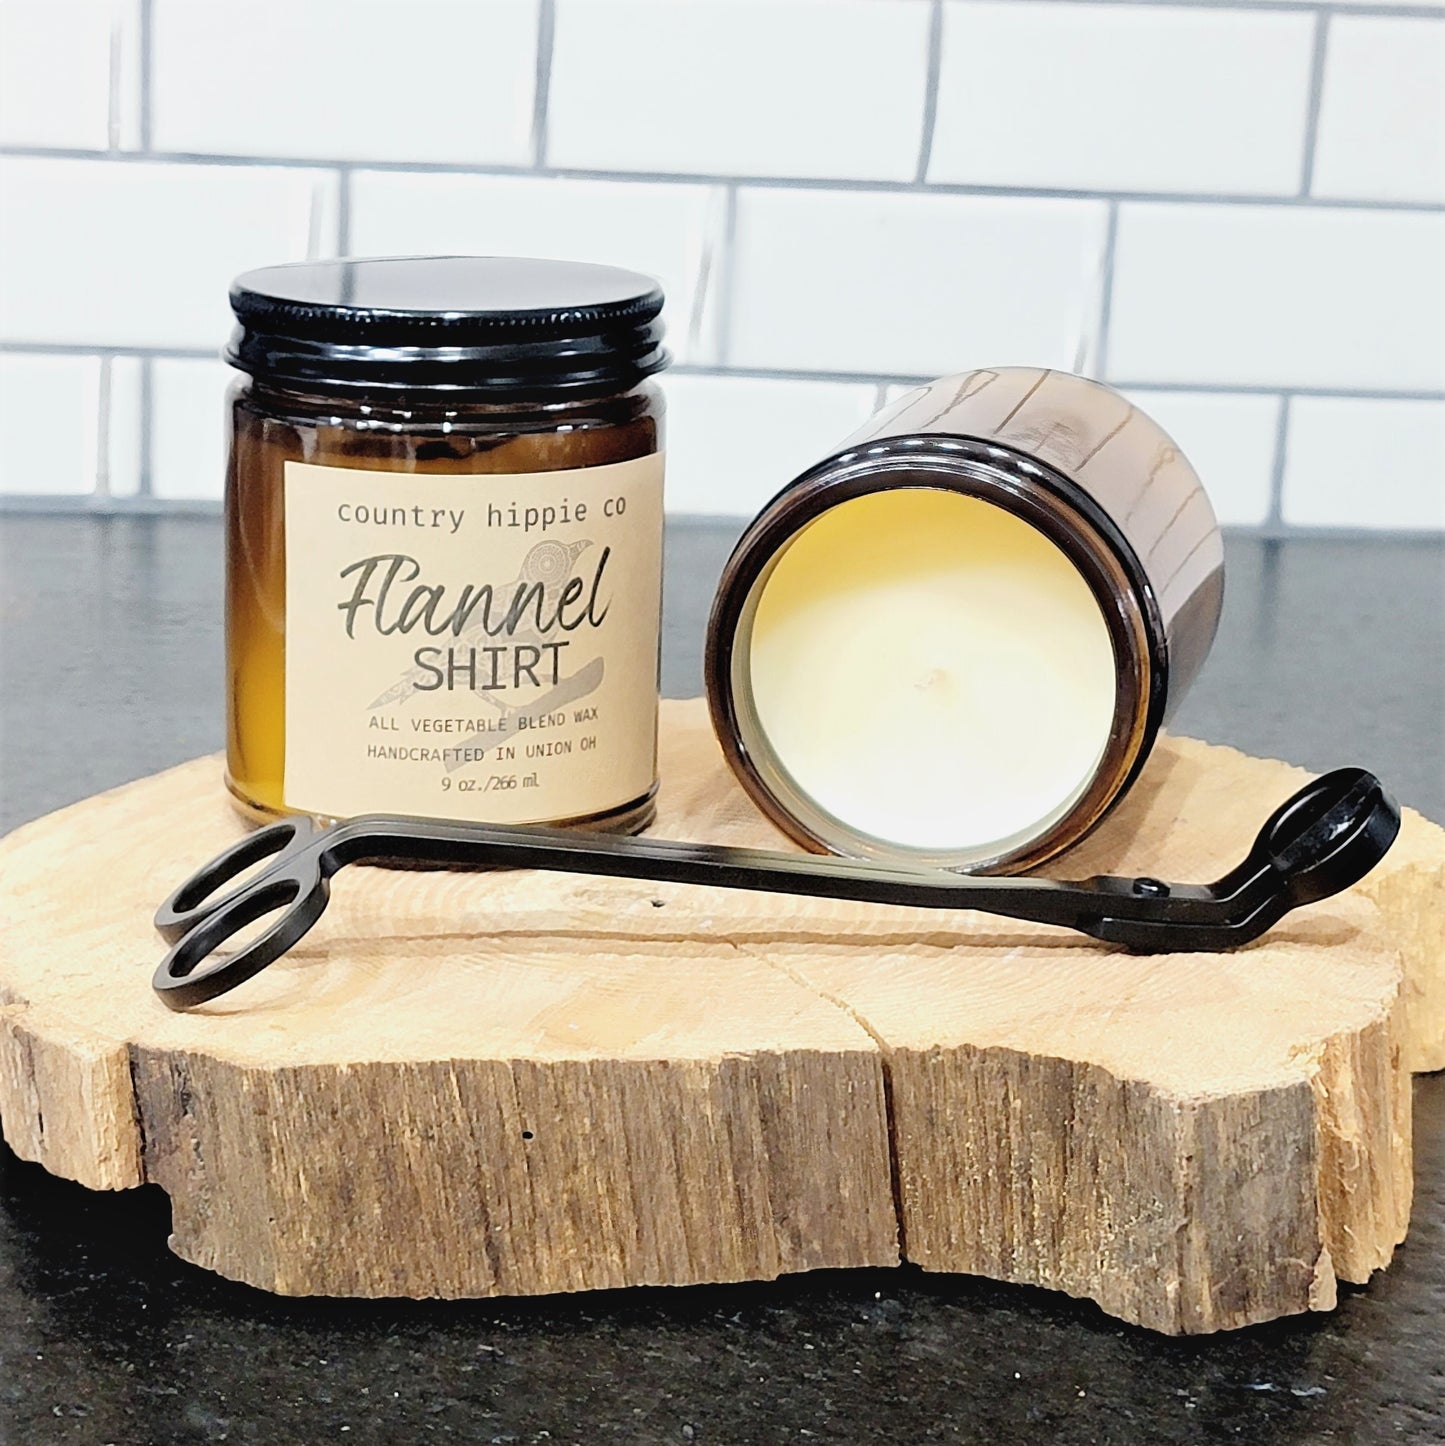 Flannel Shirt Apothecary-inspired  Jar Candle 9 oz.